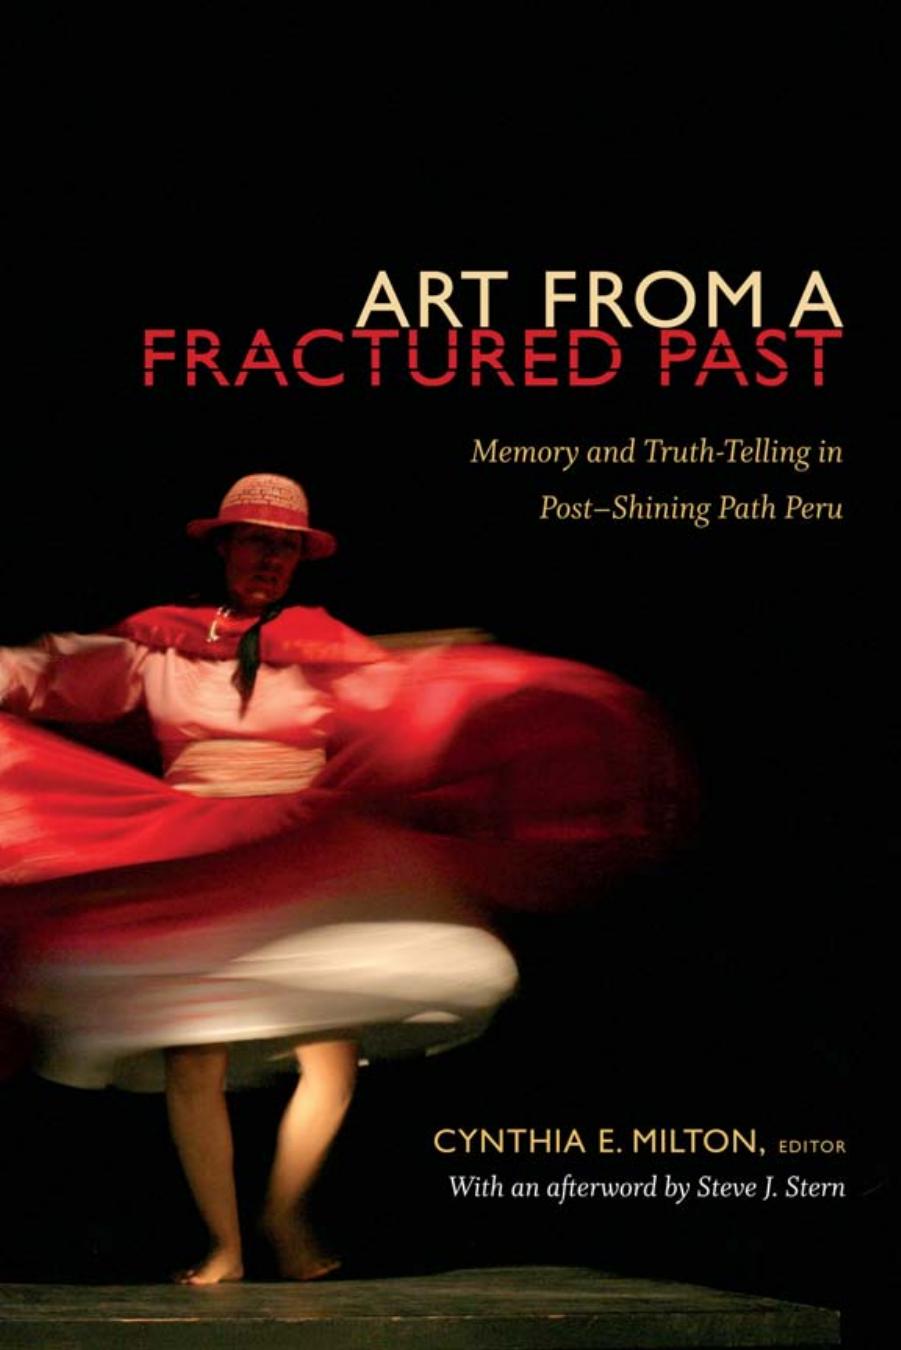 Art from a Fractured Past: Memory and Truth-Telling in Post-Shining Path Peru by Cynthia Milton